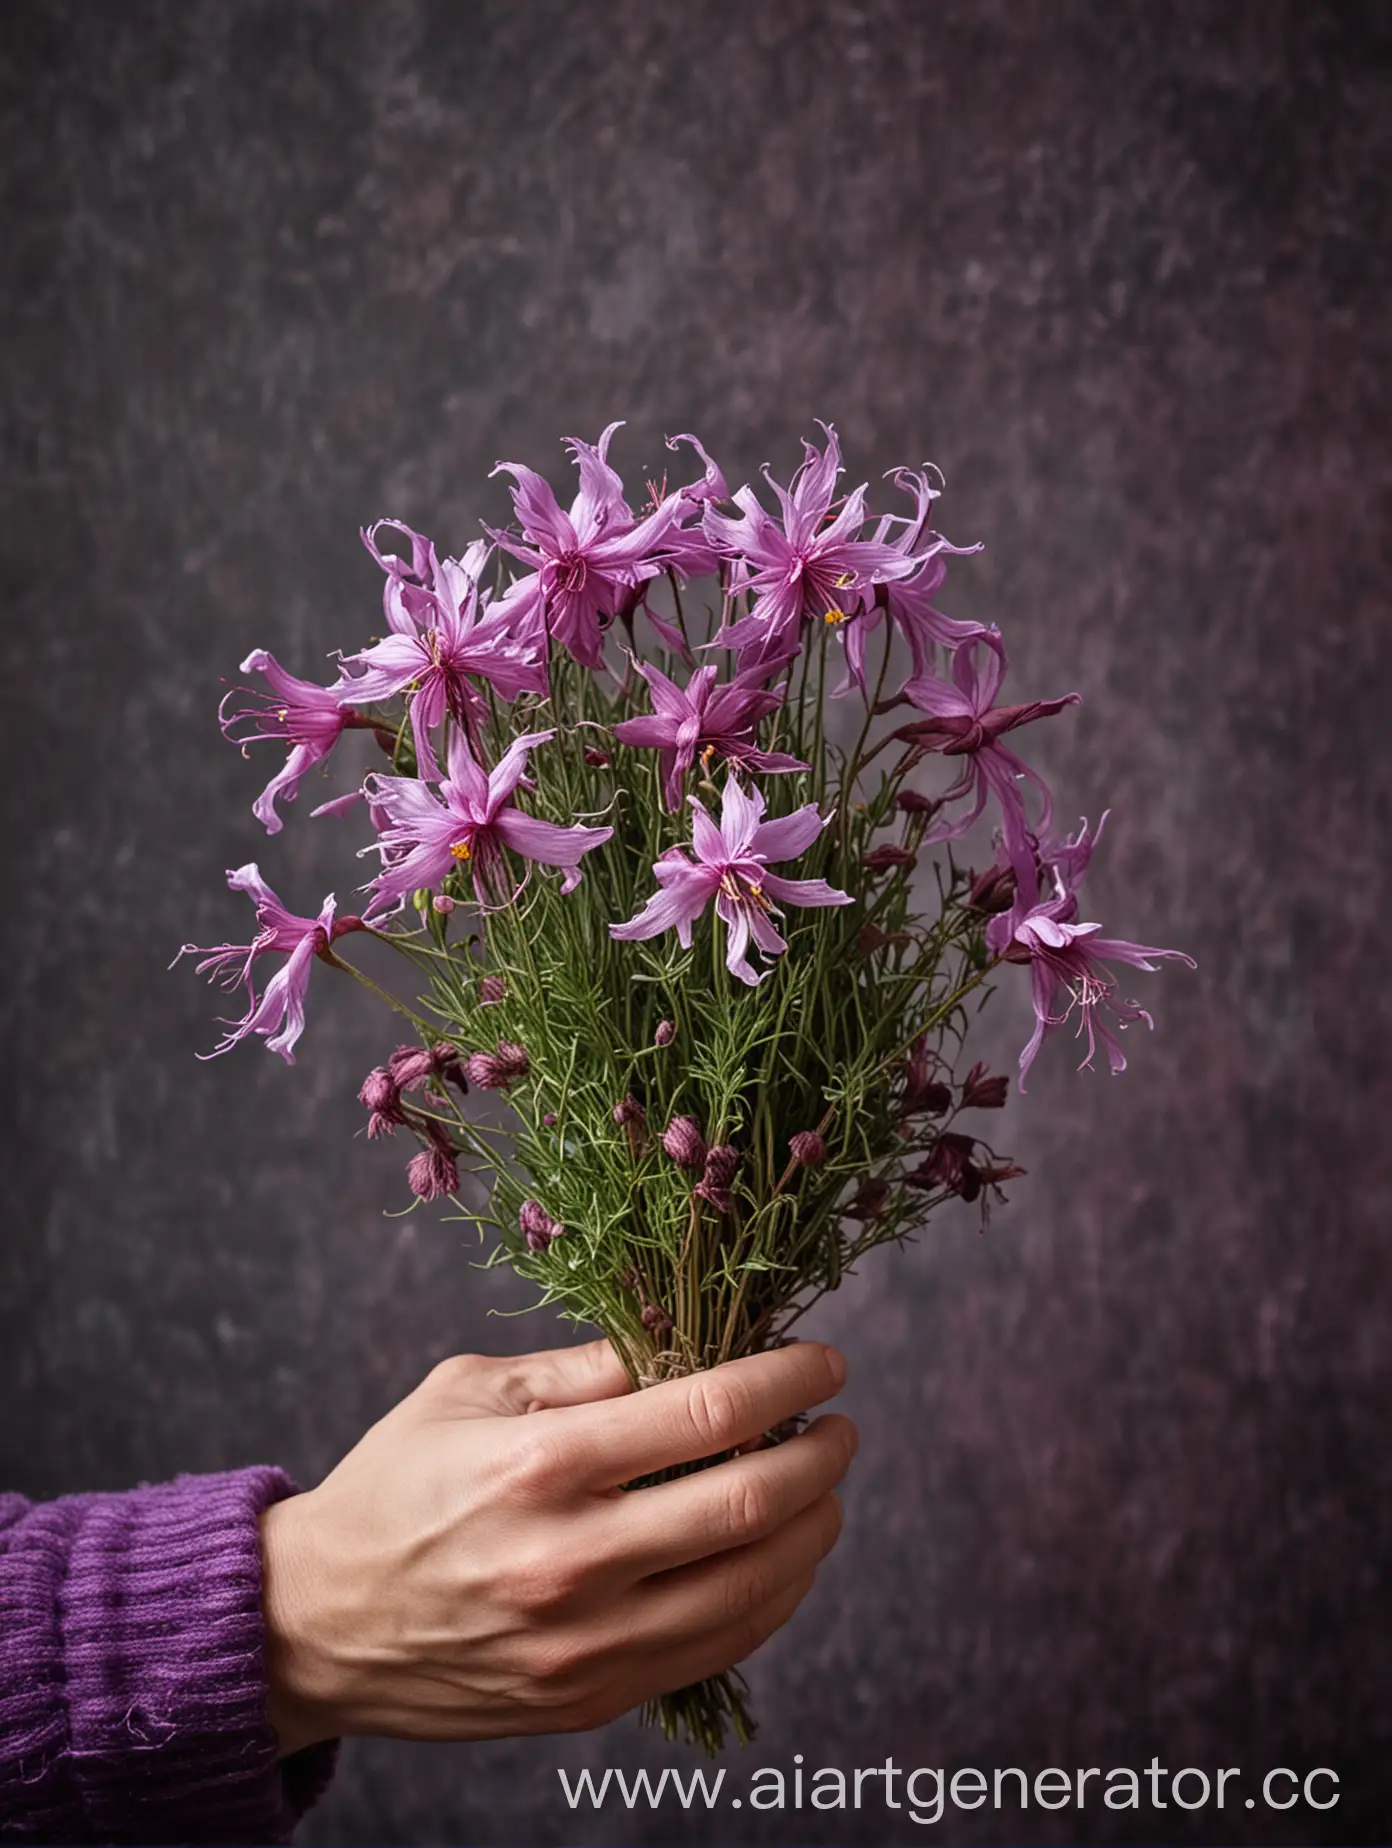 Male-Hand-Holding-Bouquet-of-Ragged-Robin-Flowers-with-Purple-Woolen-Core